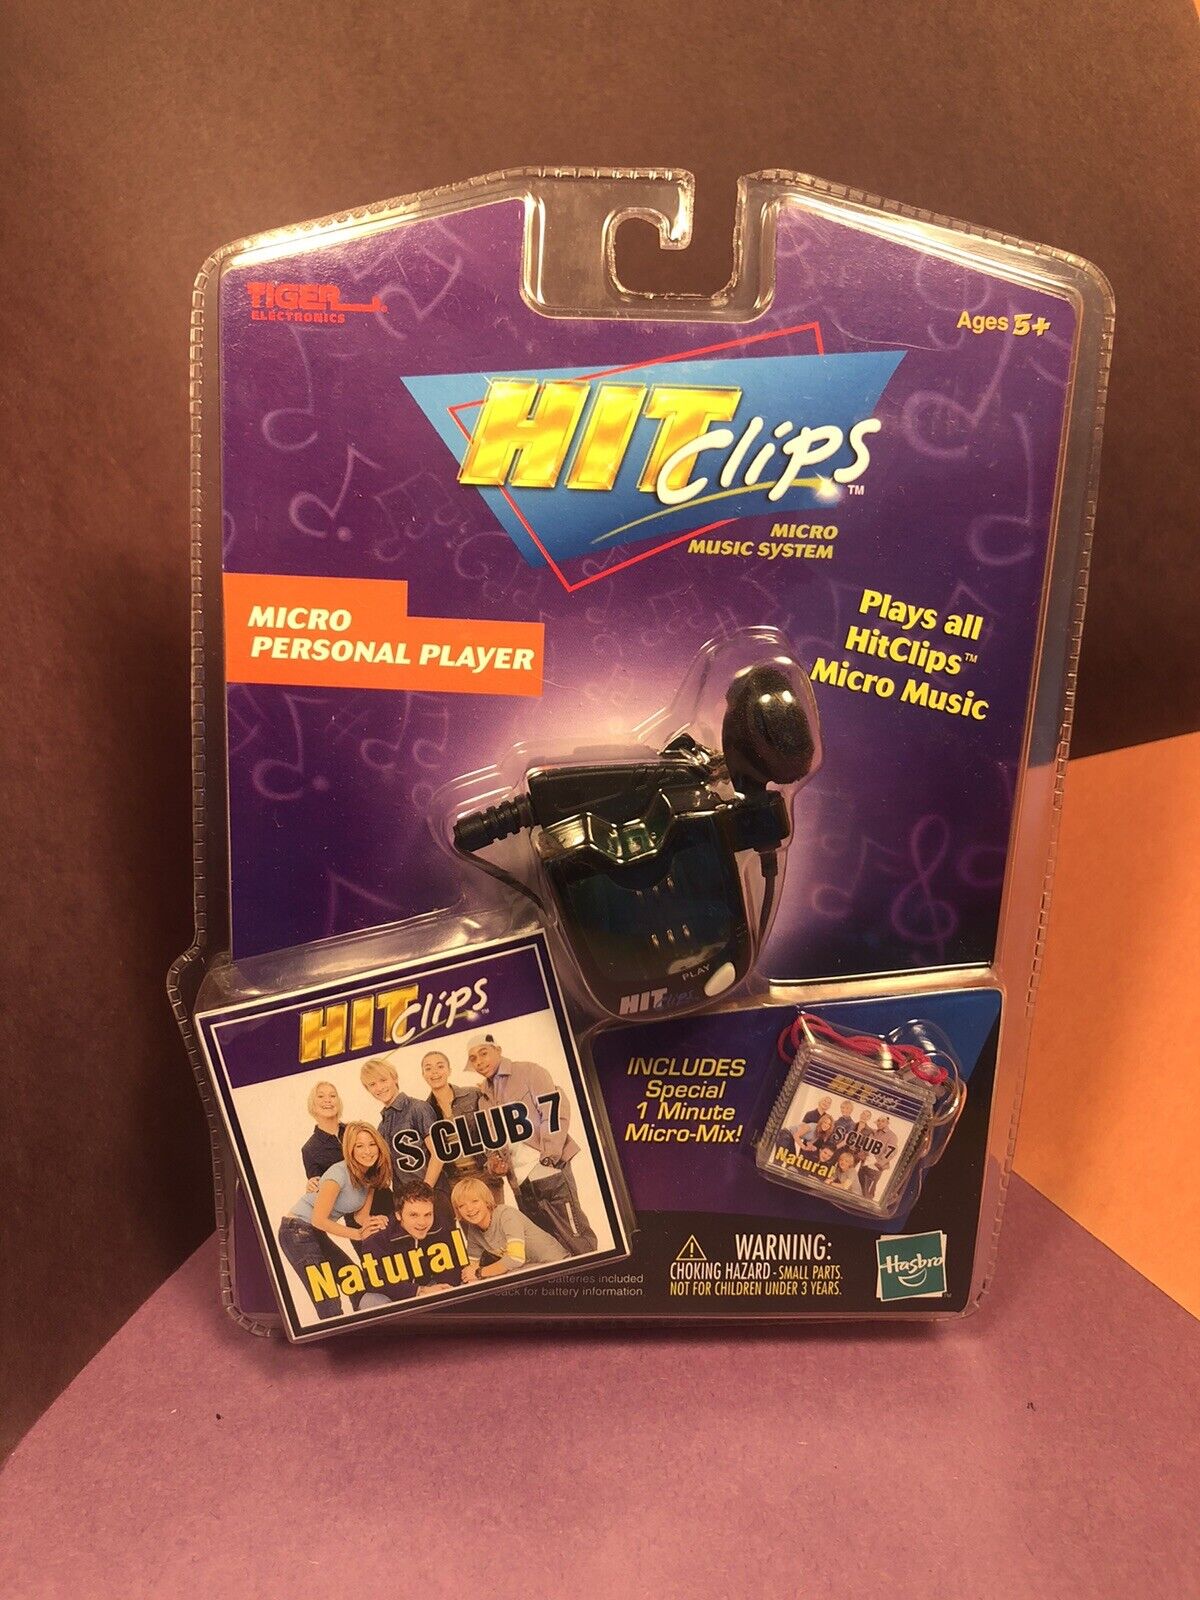 Hit Clips S Club 7 Black Personal Player Featuring “Natural”